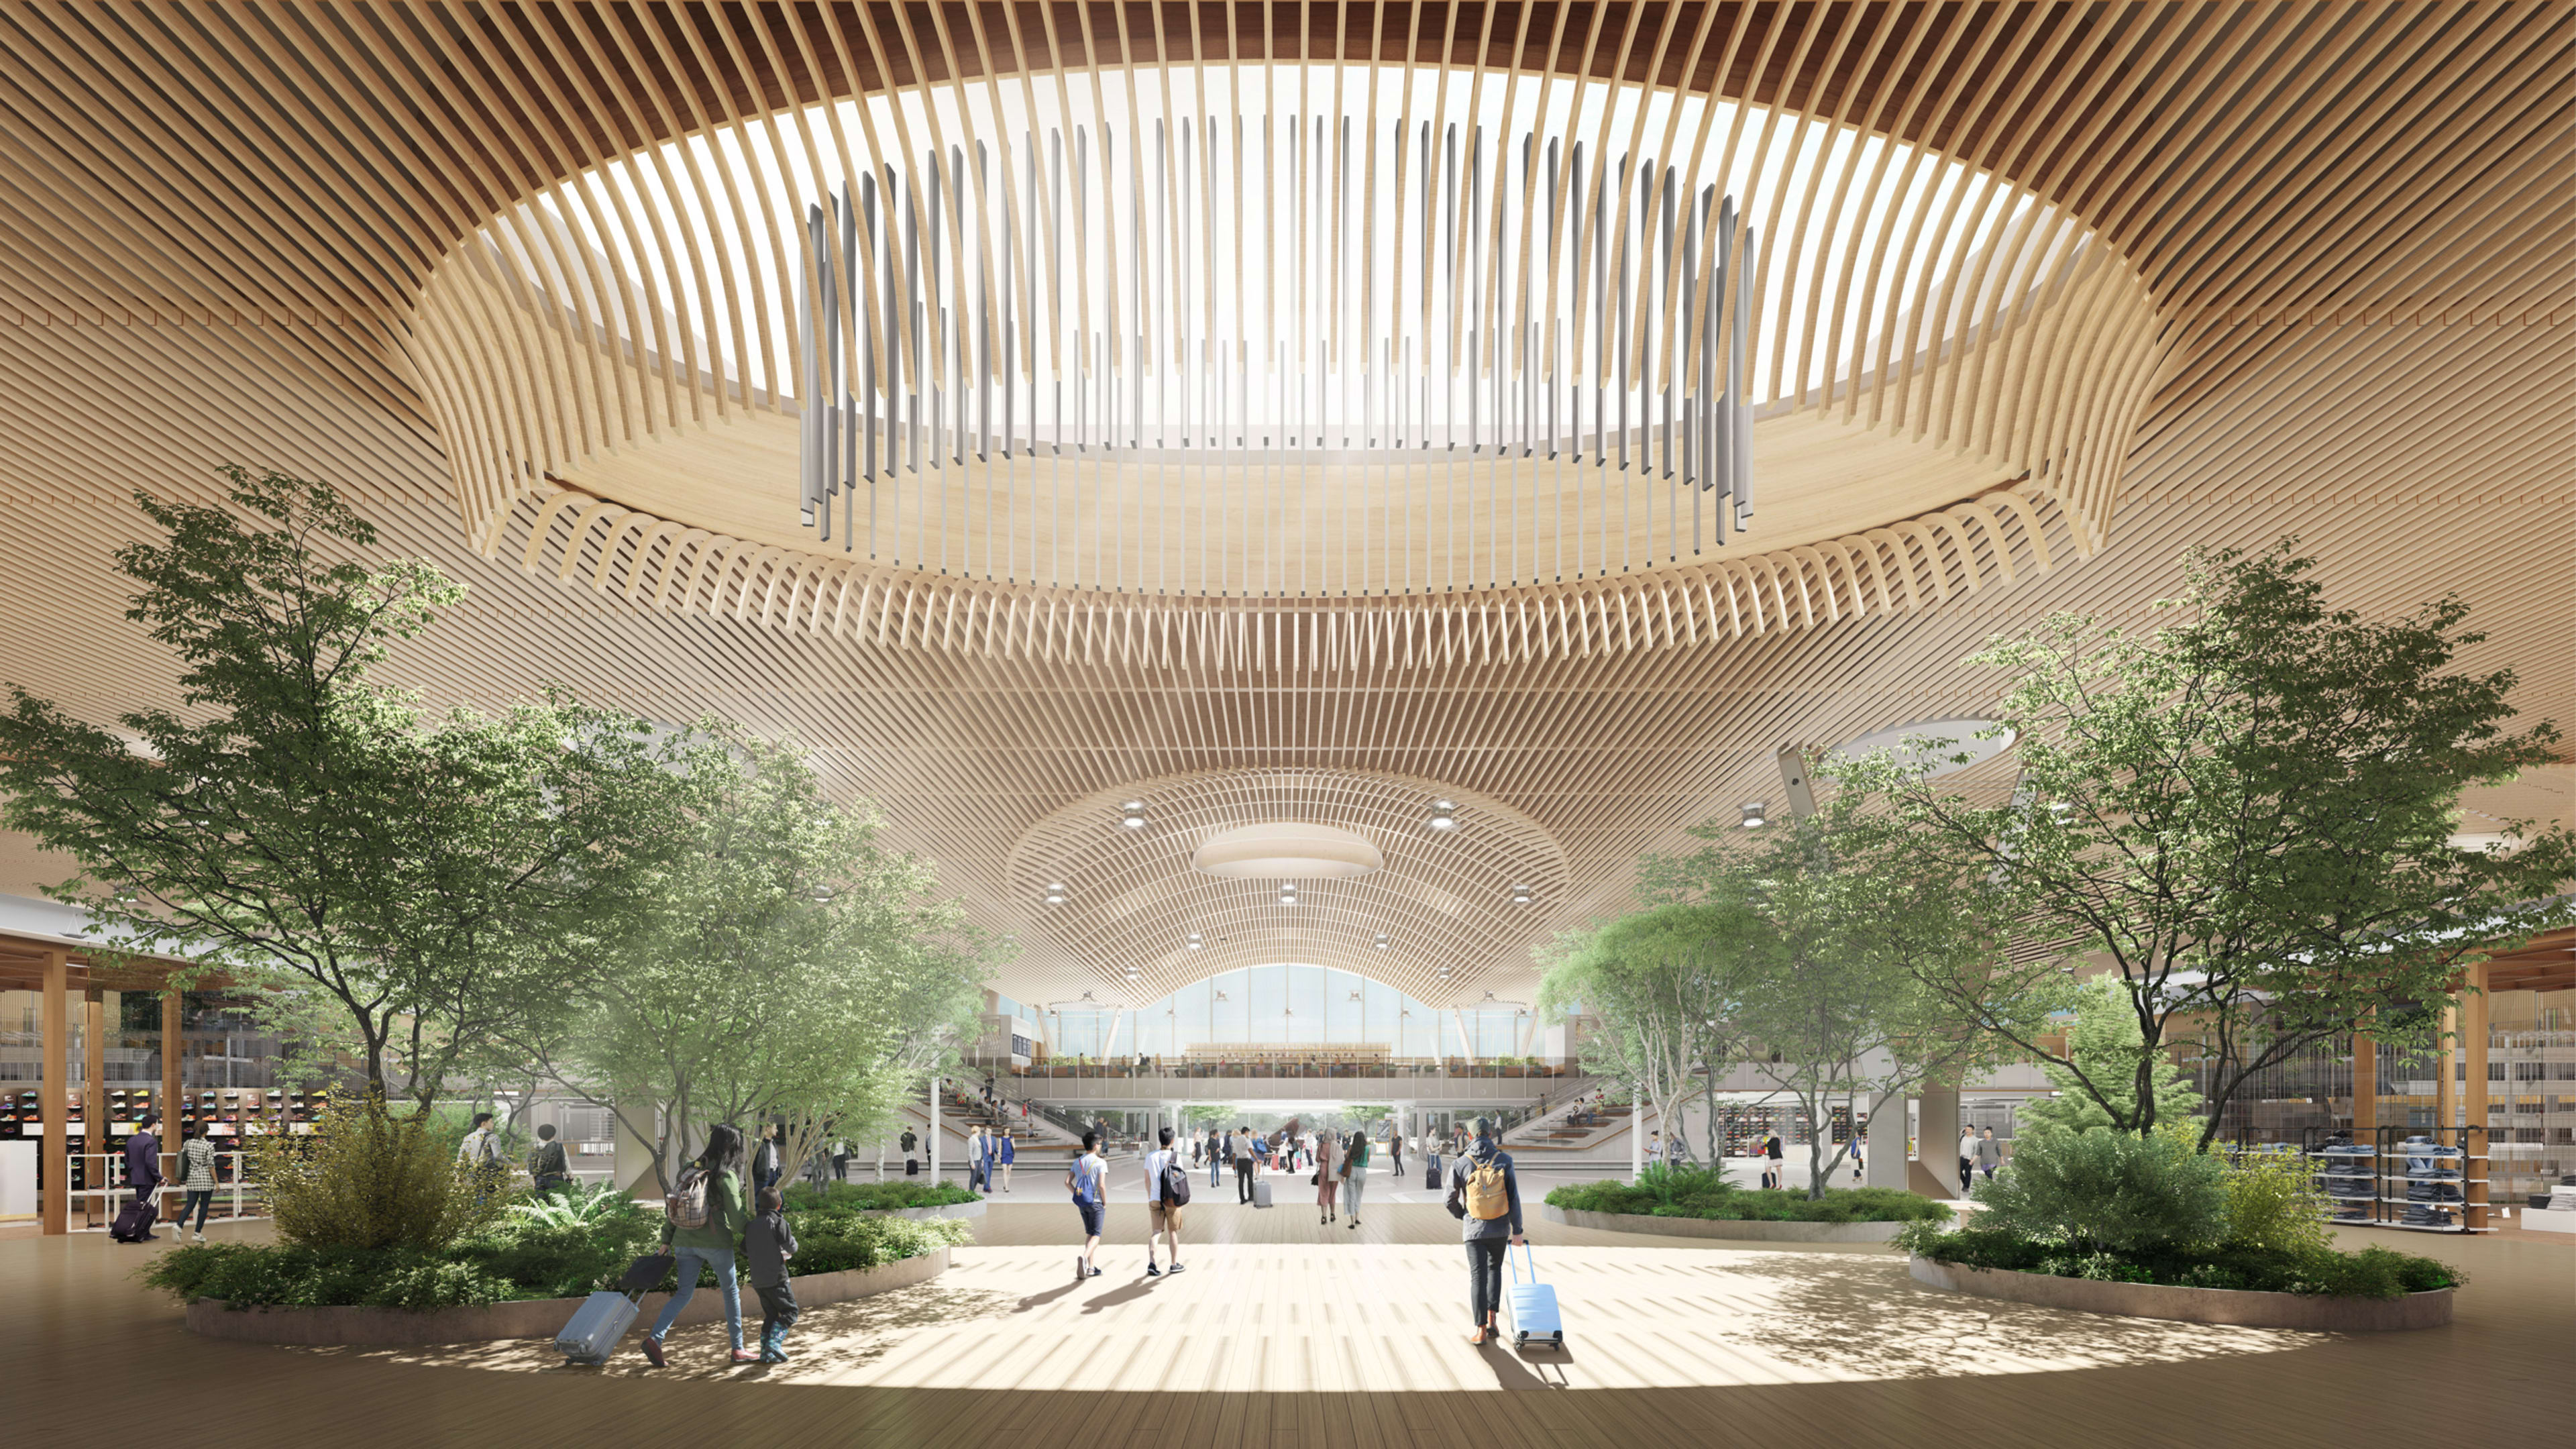 Portland’s new airport terminal looks like it’s from the future—but it’s built out of wood